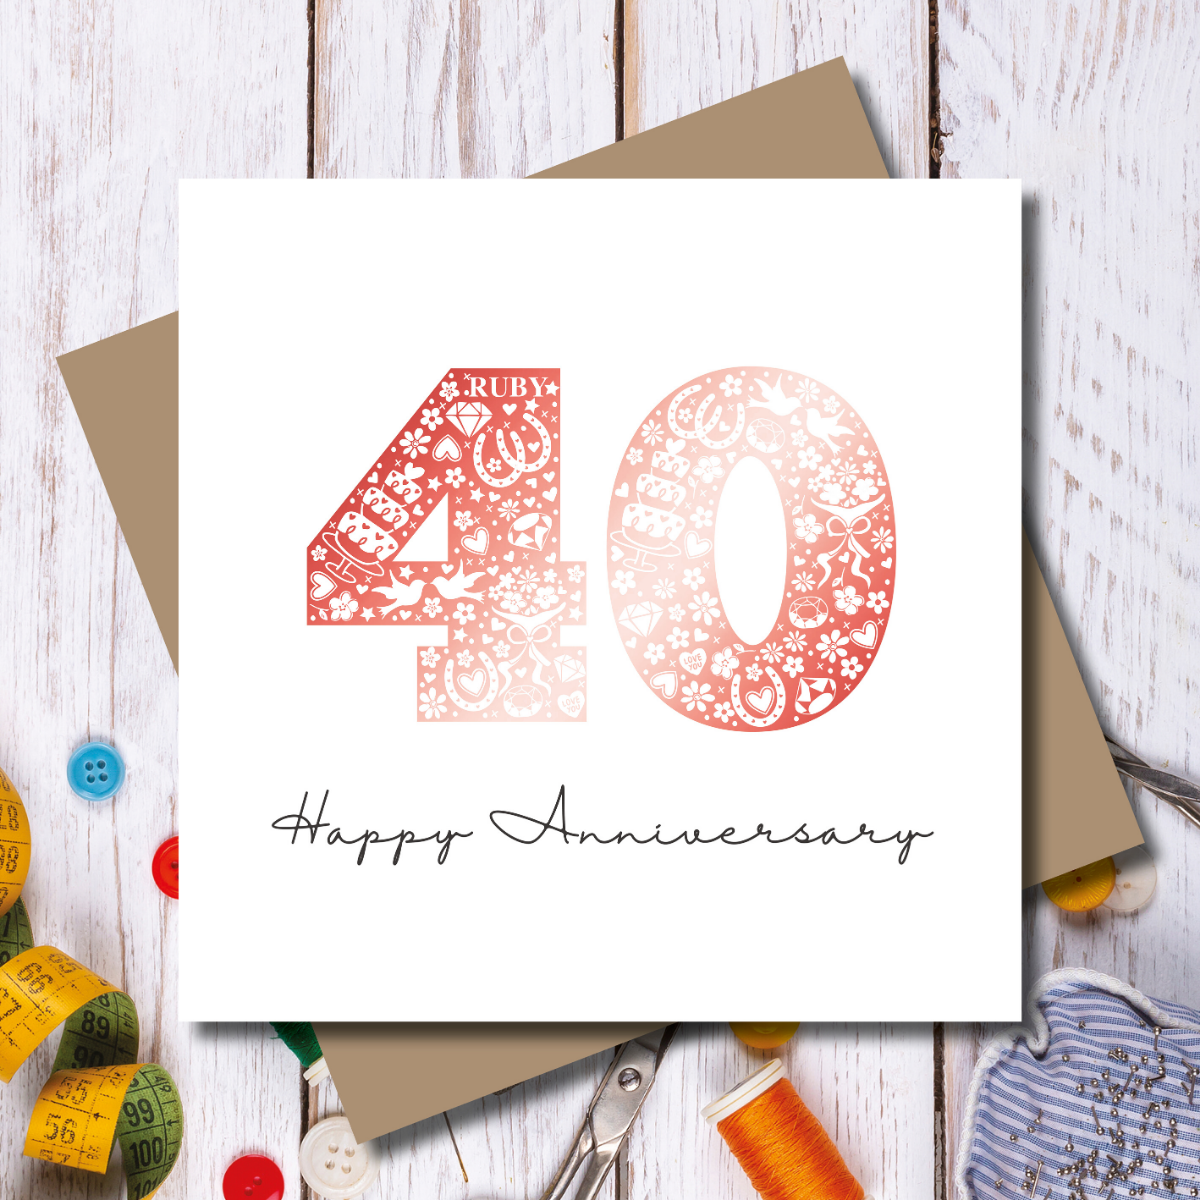 Ruby Red 40th Wedding Anniversary foiled Greeting Card